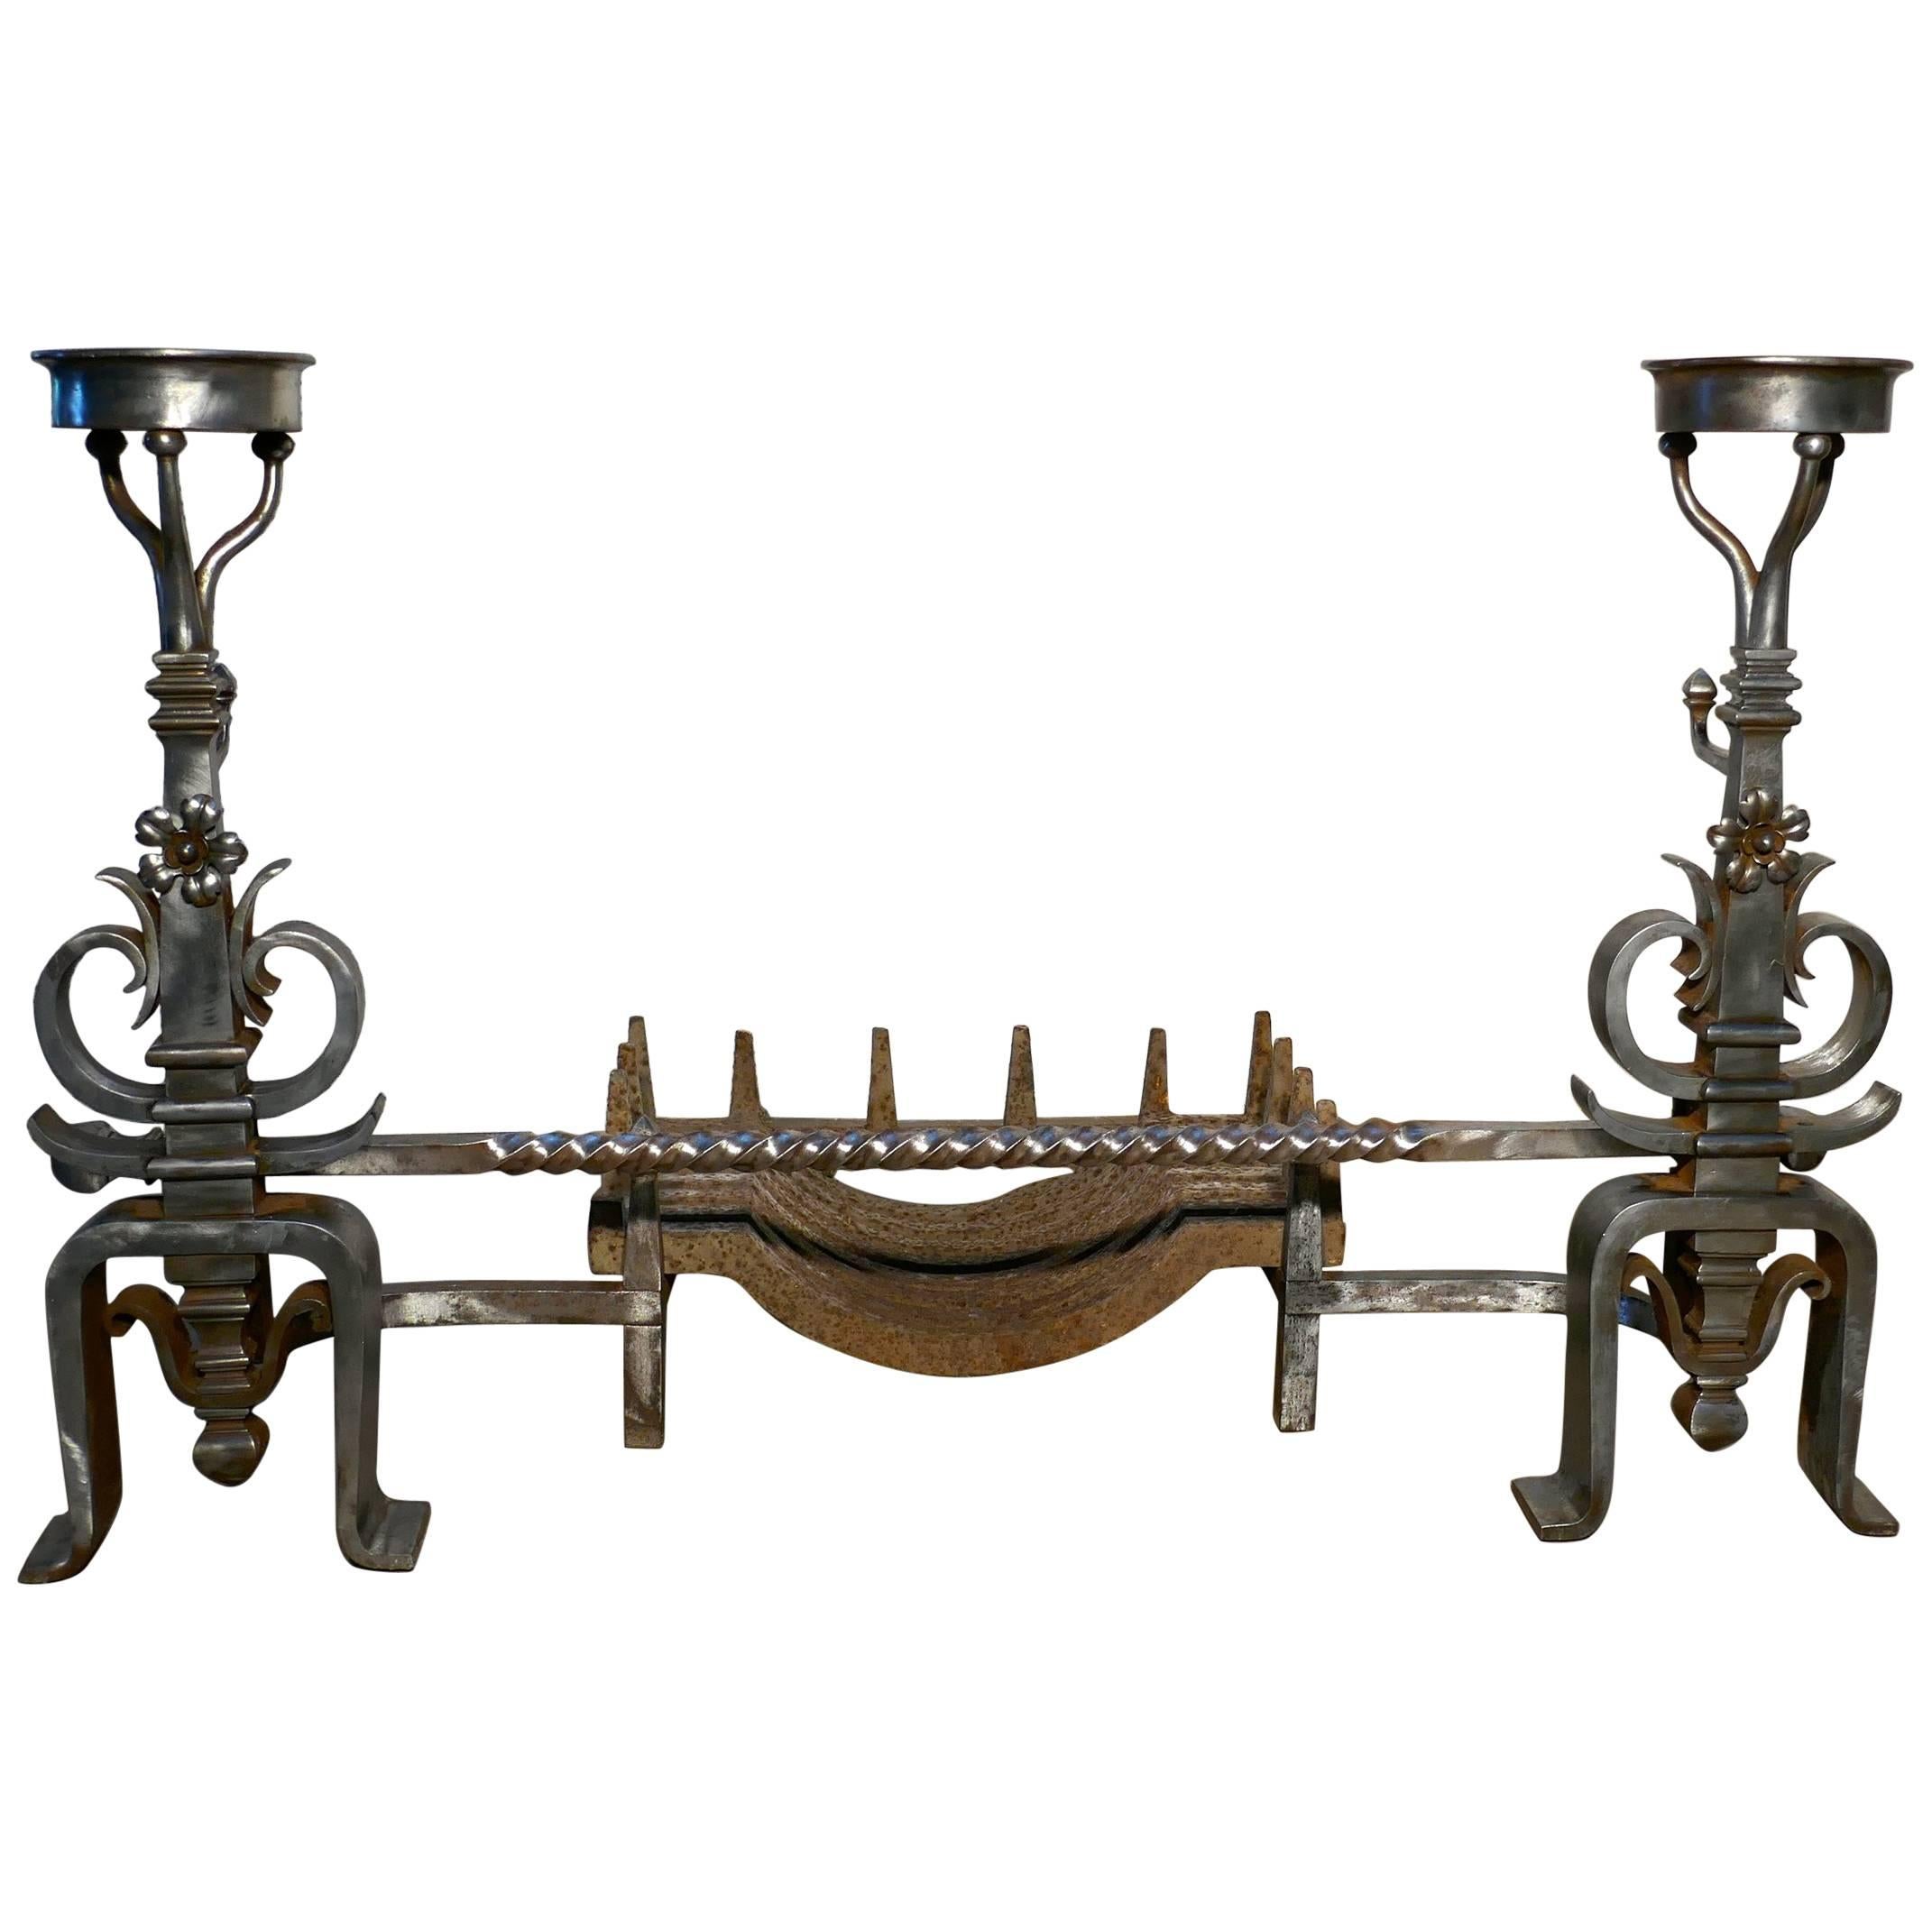 Large Pair of 19th Century French Iron Andirons or Fire Dogs